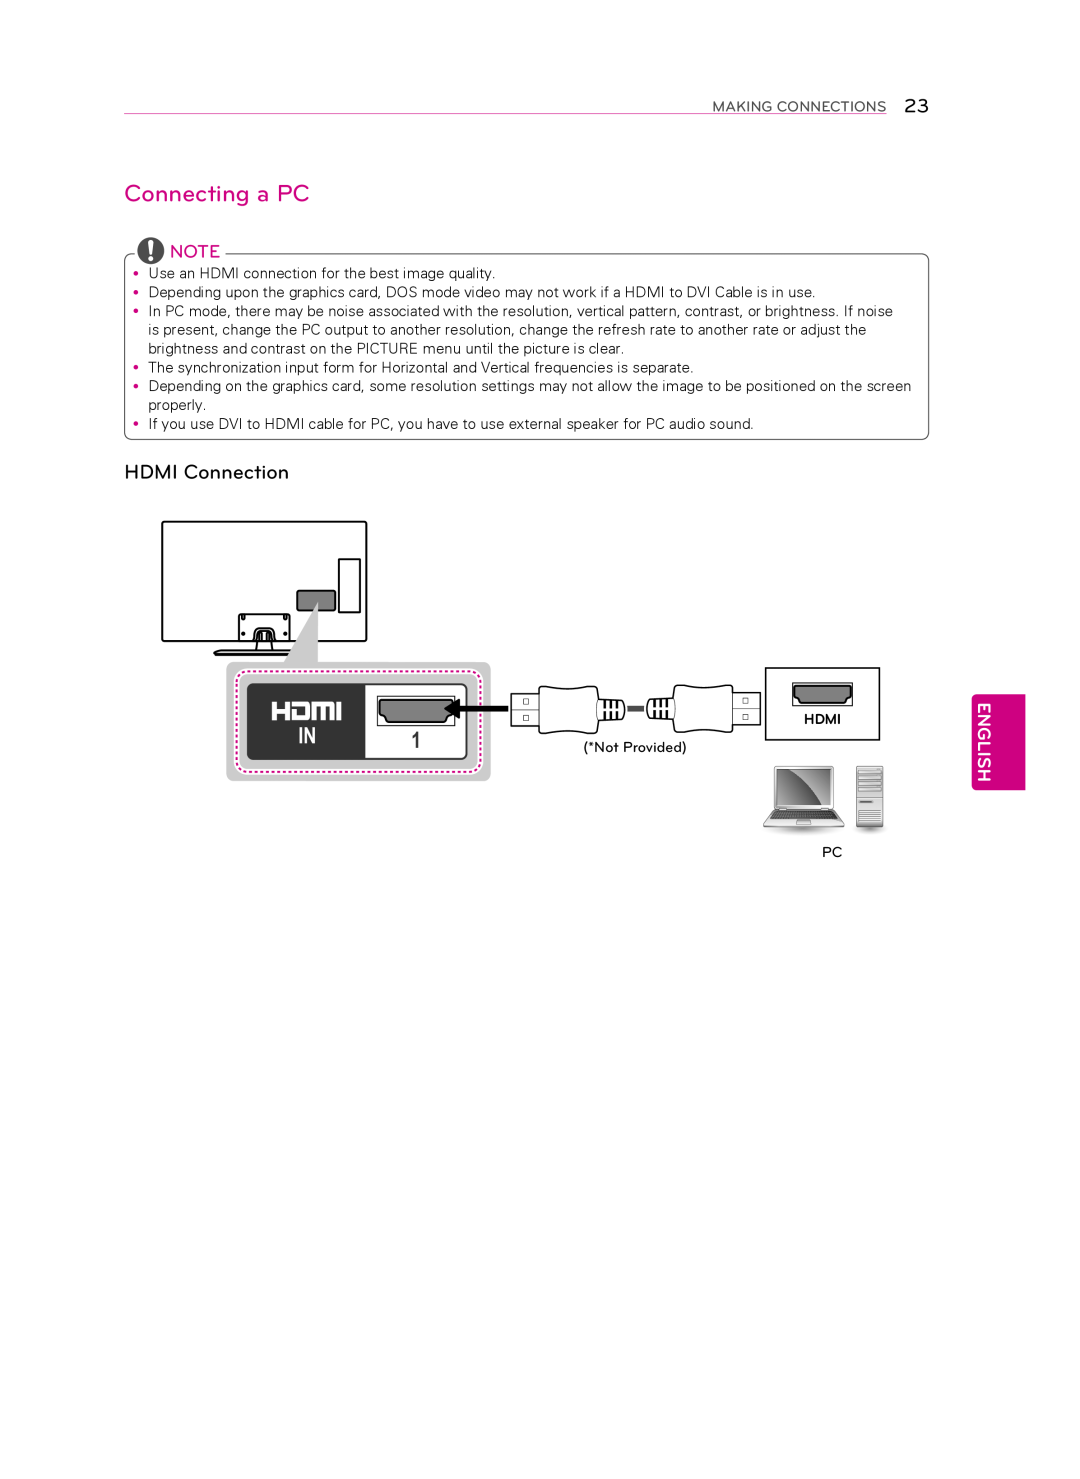 LG Electronics 60LN5400 owner manual Connecting a PC, HDMI Connection, English, Making Connections, Hdmi, Not Provided 